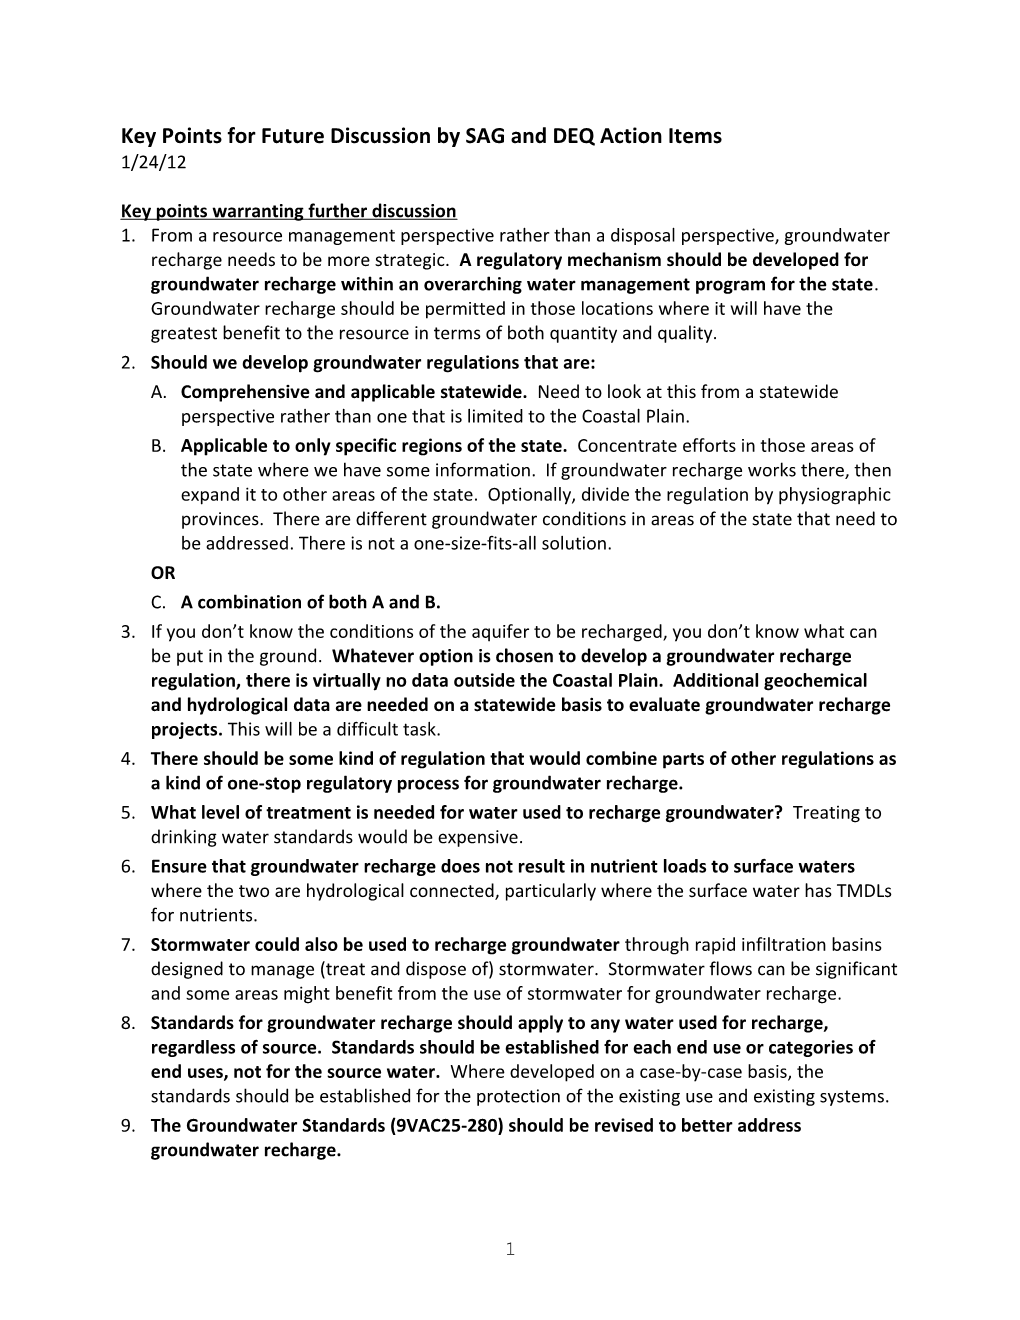 Major Points and Action Items from SAG Notes of 12/1/11 Meeting